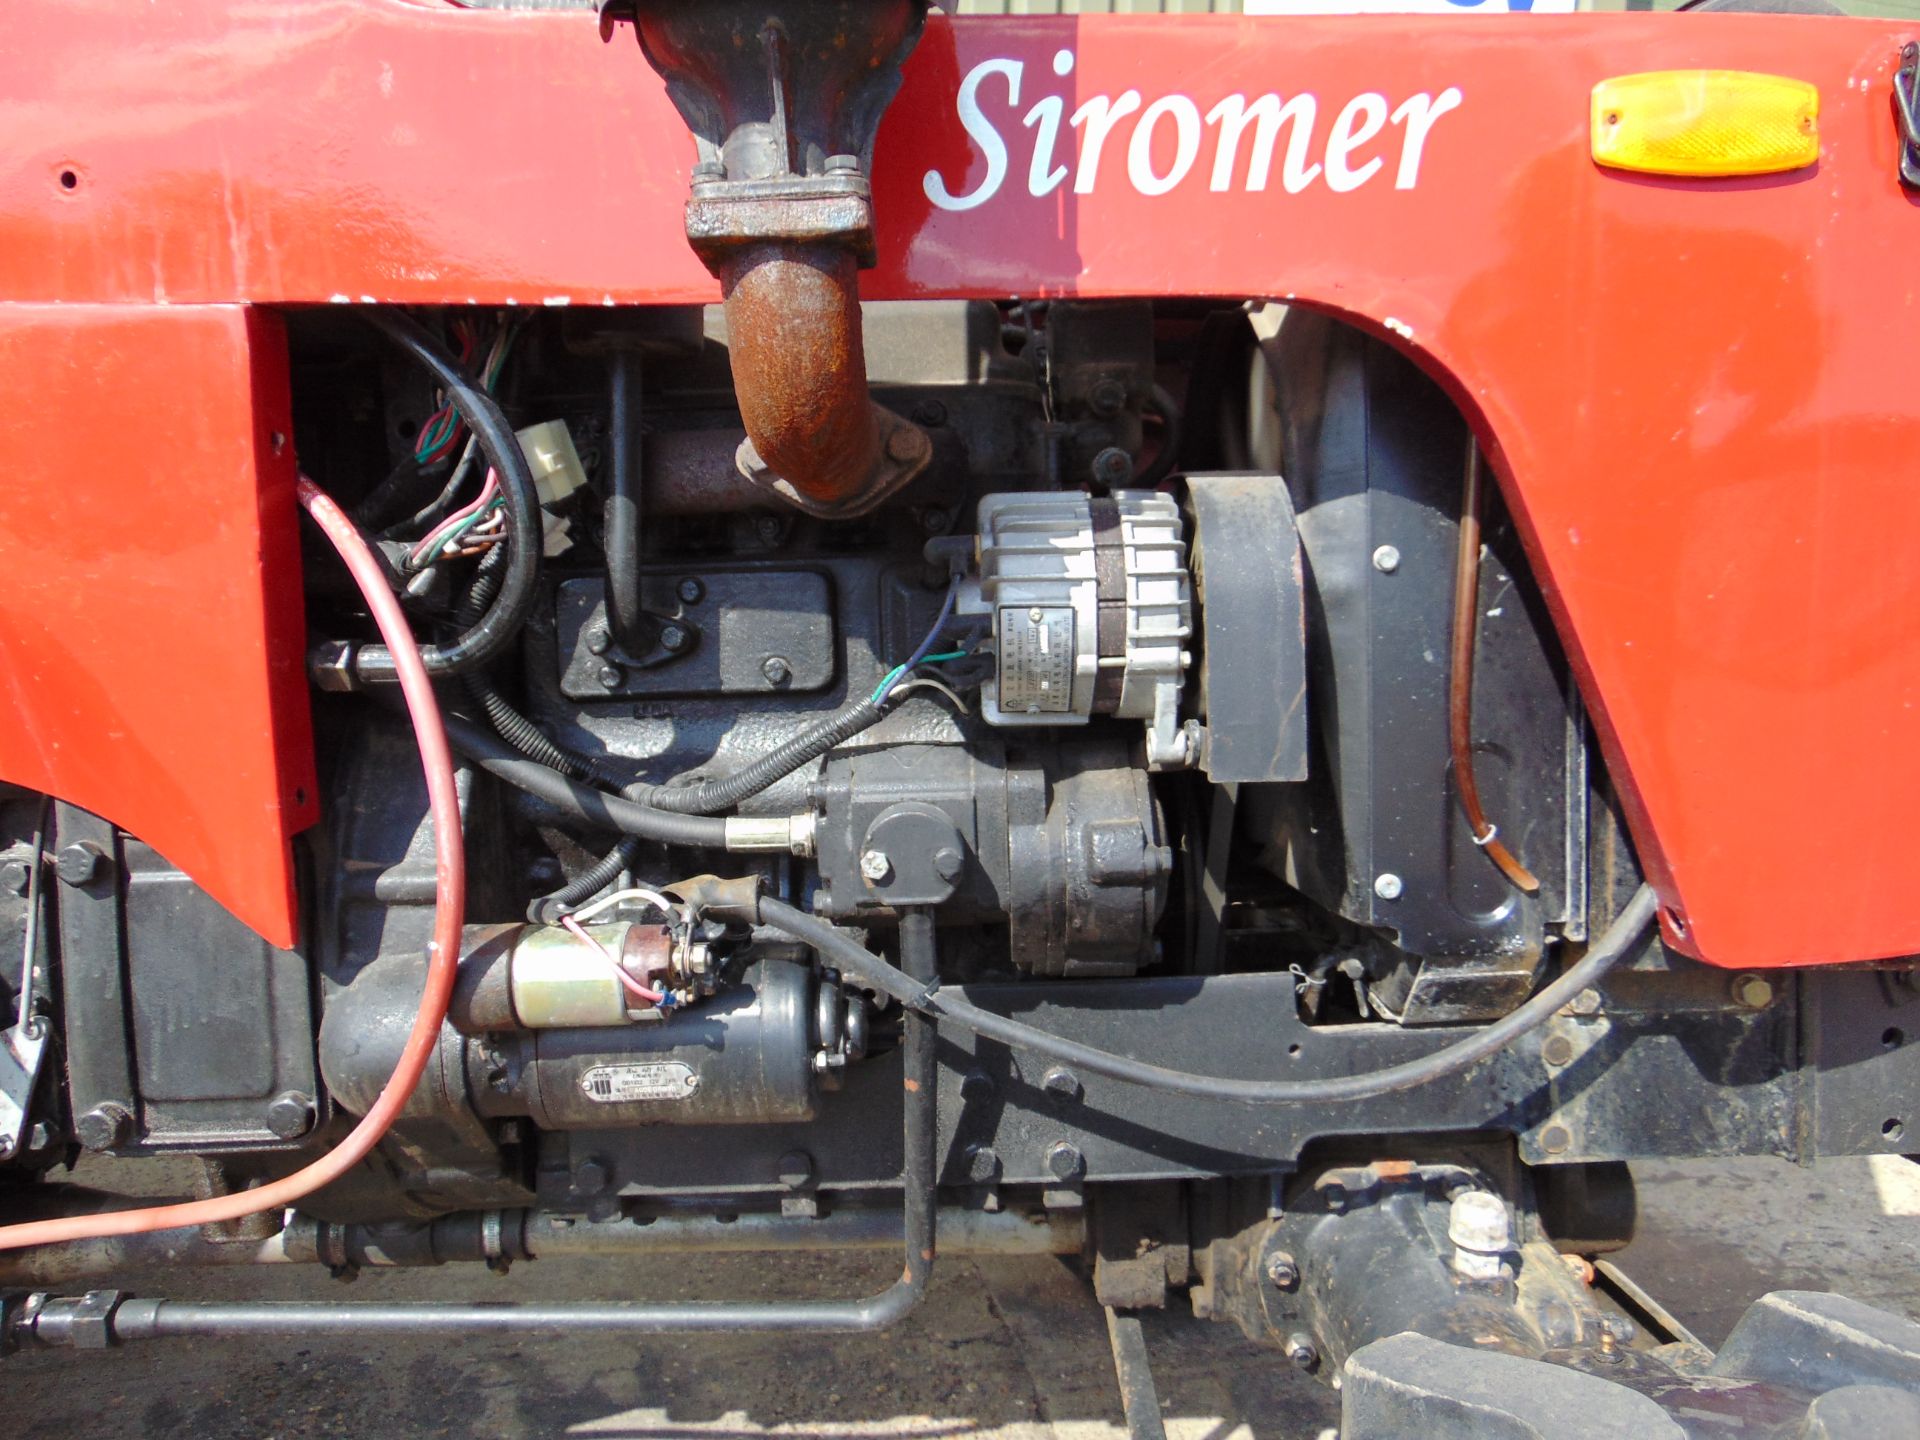 Siromer 204S 4WD Tractor c/w PTO driven Flail Mower ONLY 4 Hours! - Image 20 of 21